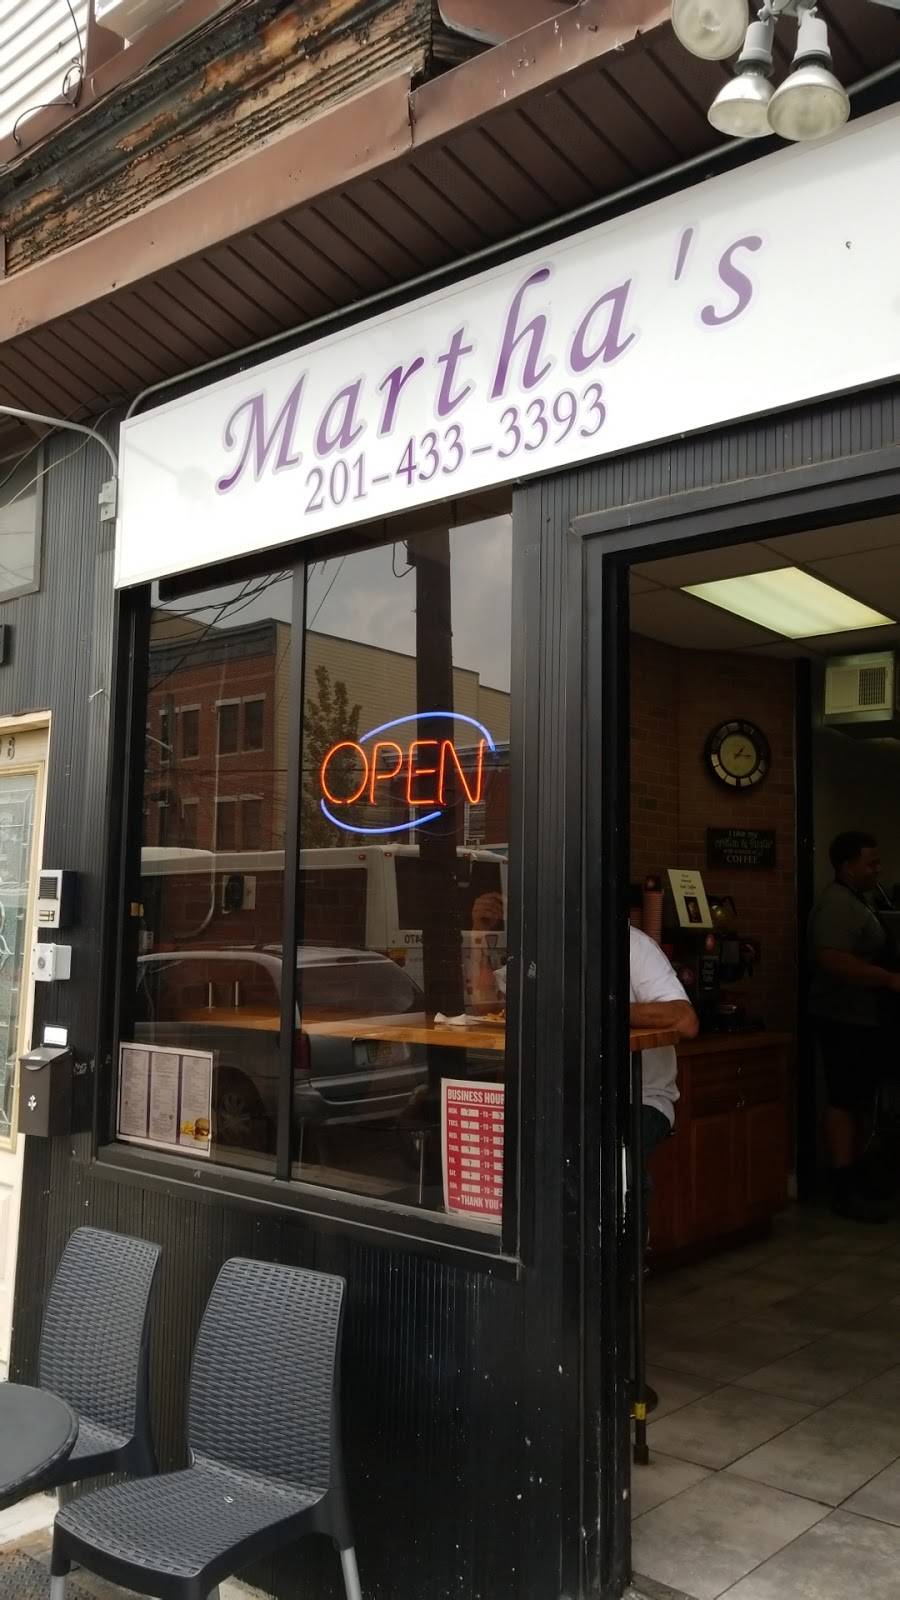 Marthas | restaurant | 308 Pacific Ave, Jersey City, NJ 07304, USA | 2014333393 OR +1 201-433-3393